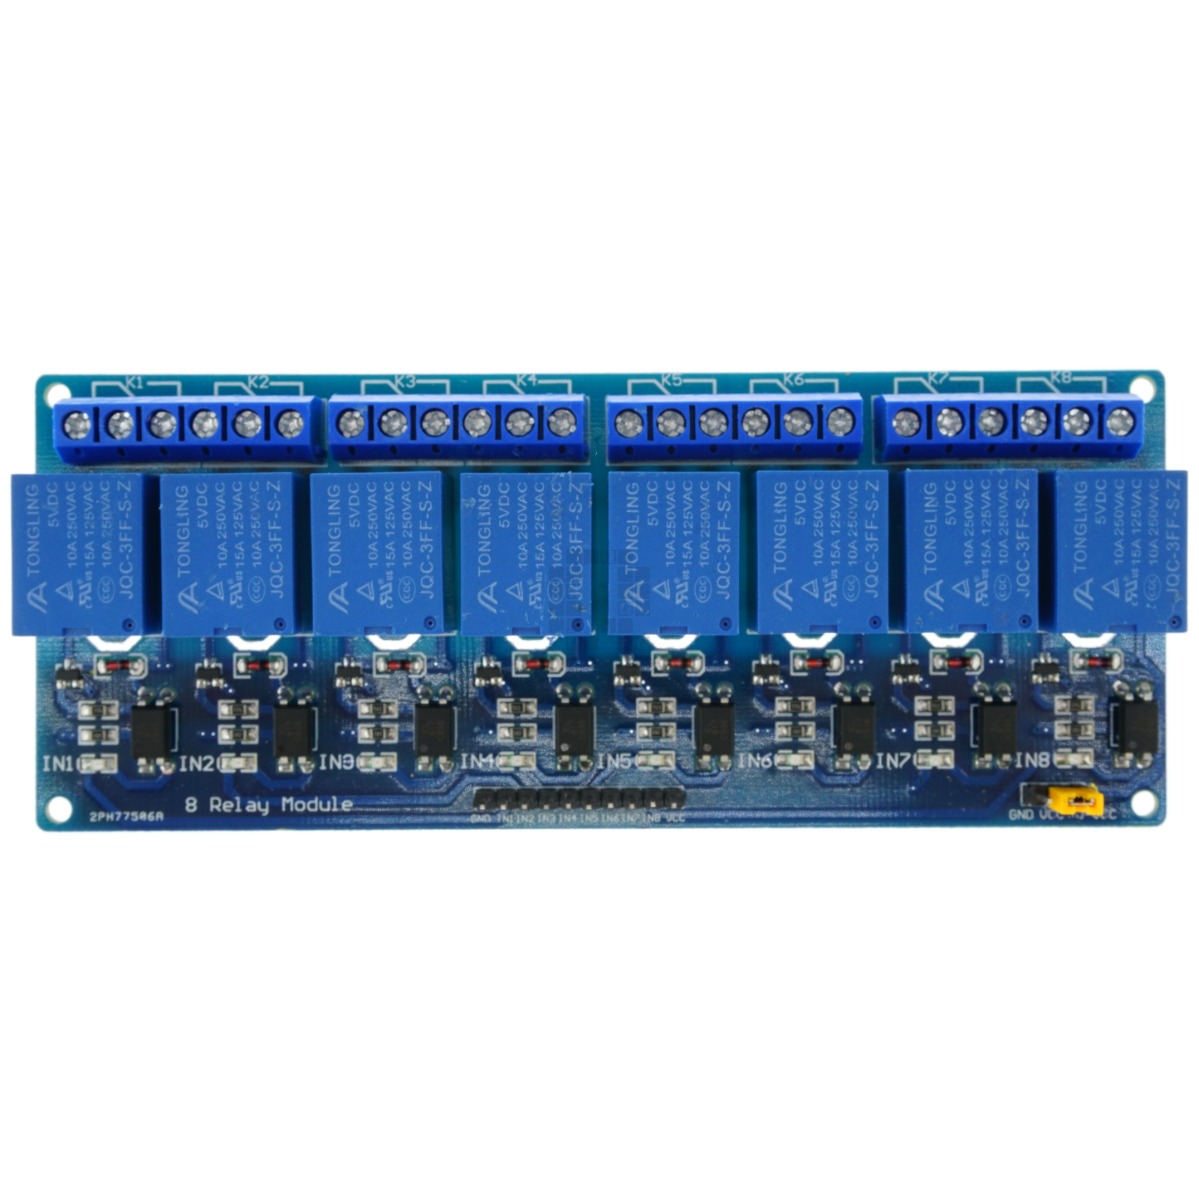 Geekcreit 8 Channel Isolated Relay Module, 5V, SPDT Output, Arduino